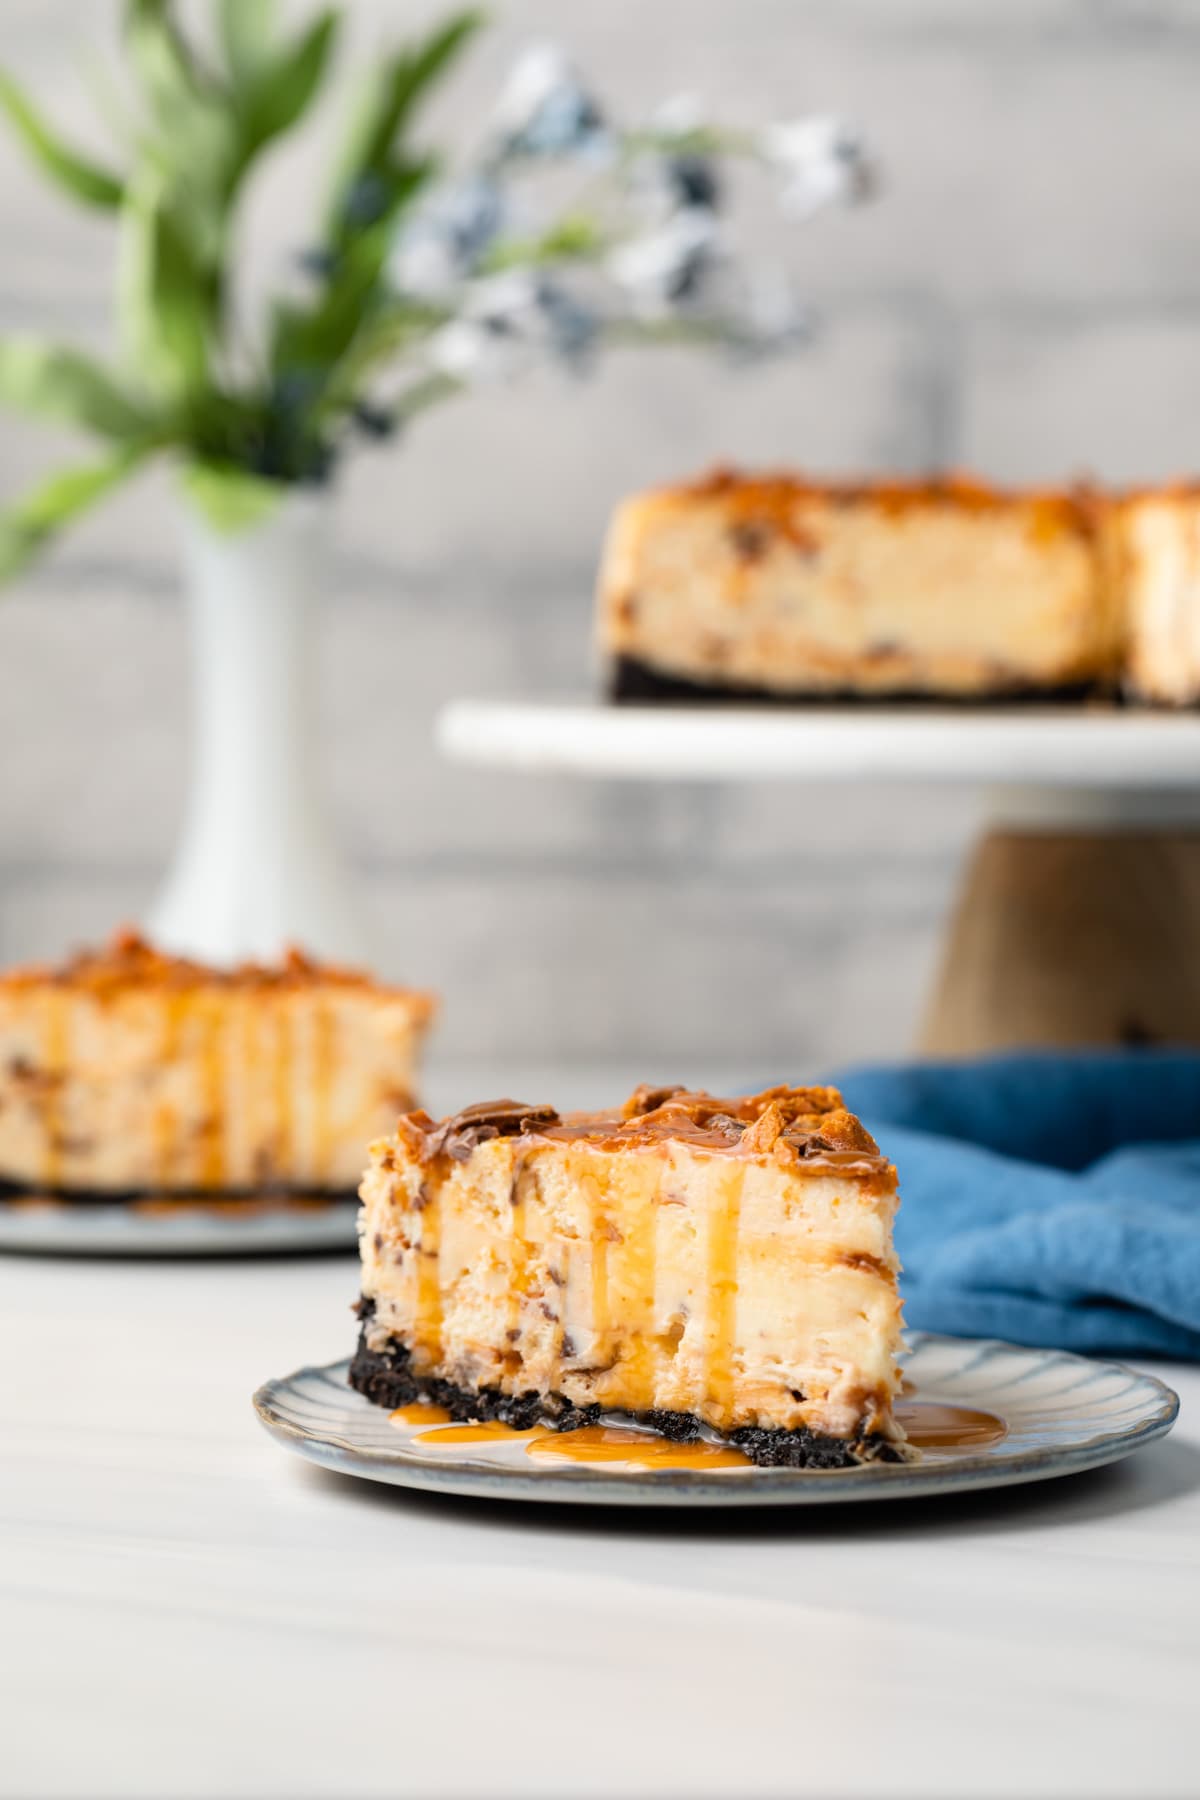 Slice of butterfinger cheesecake on plate.